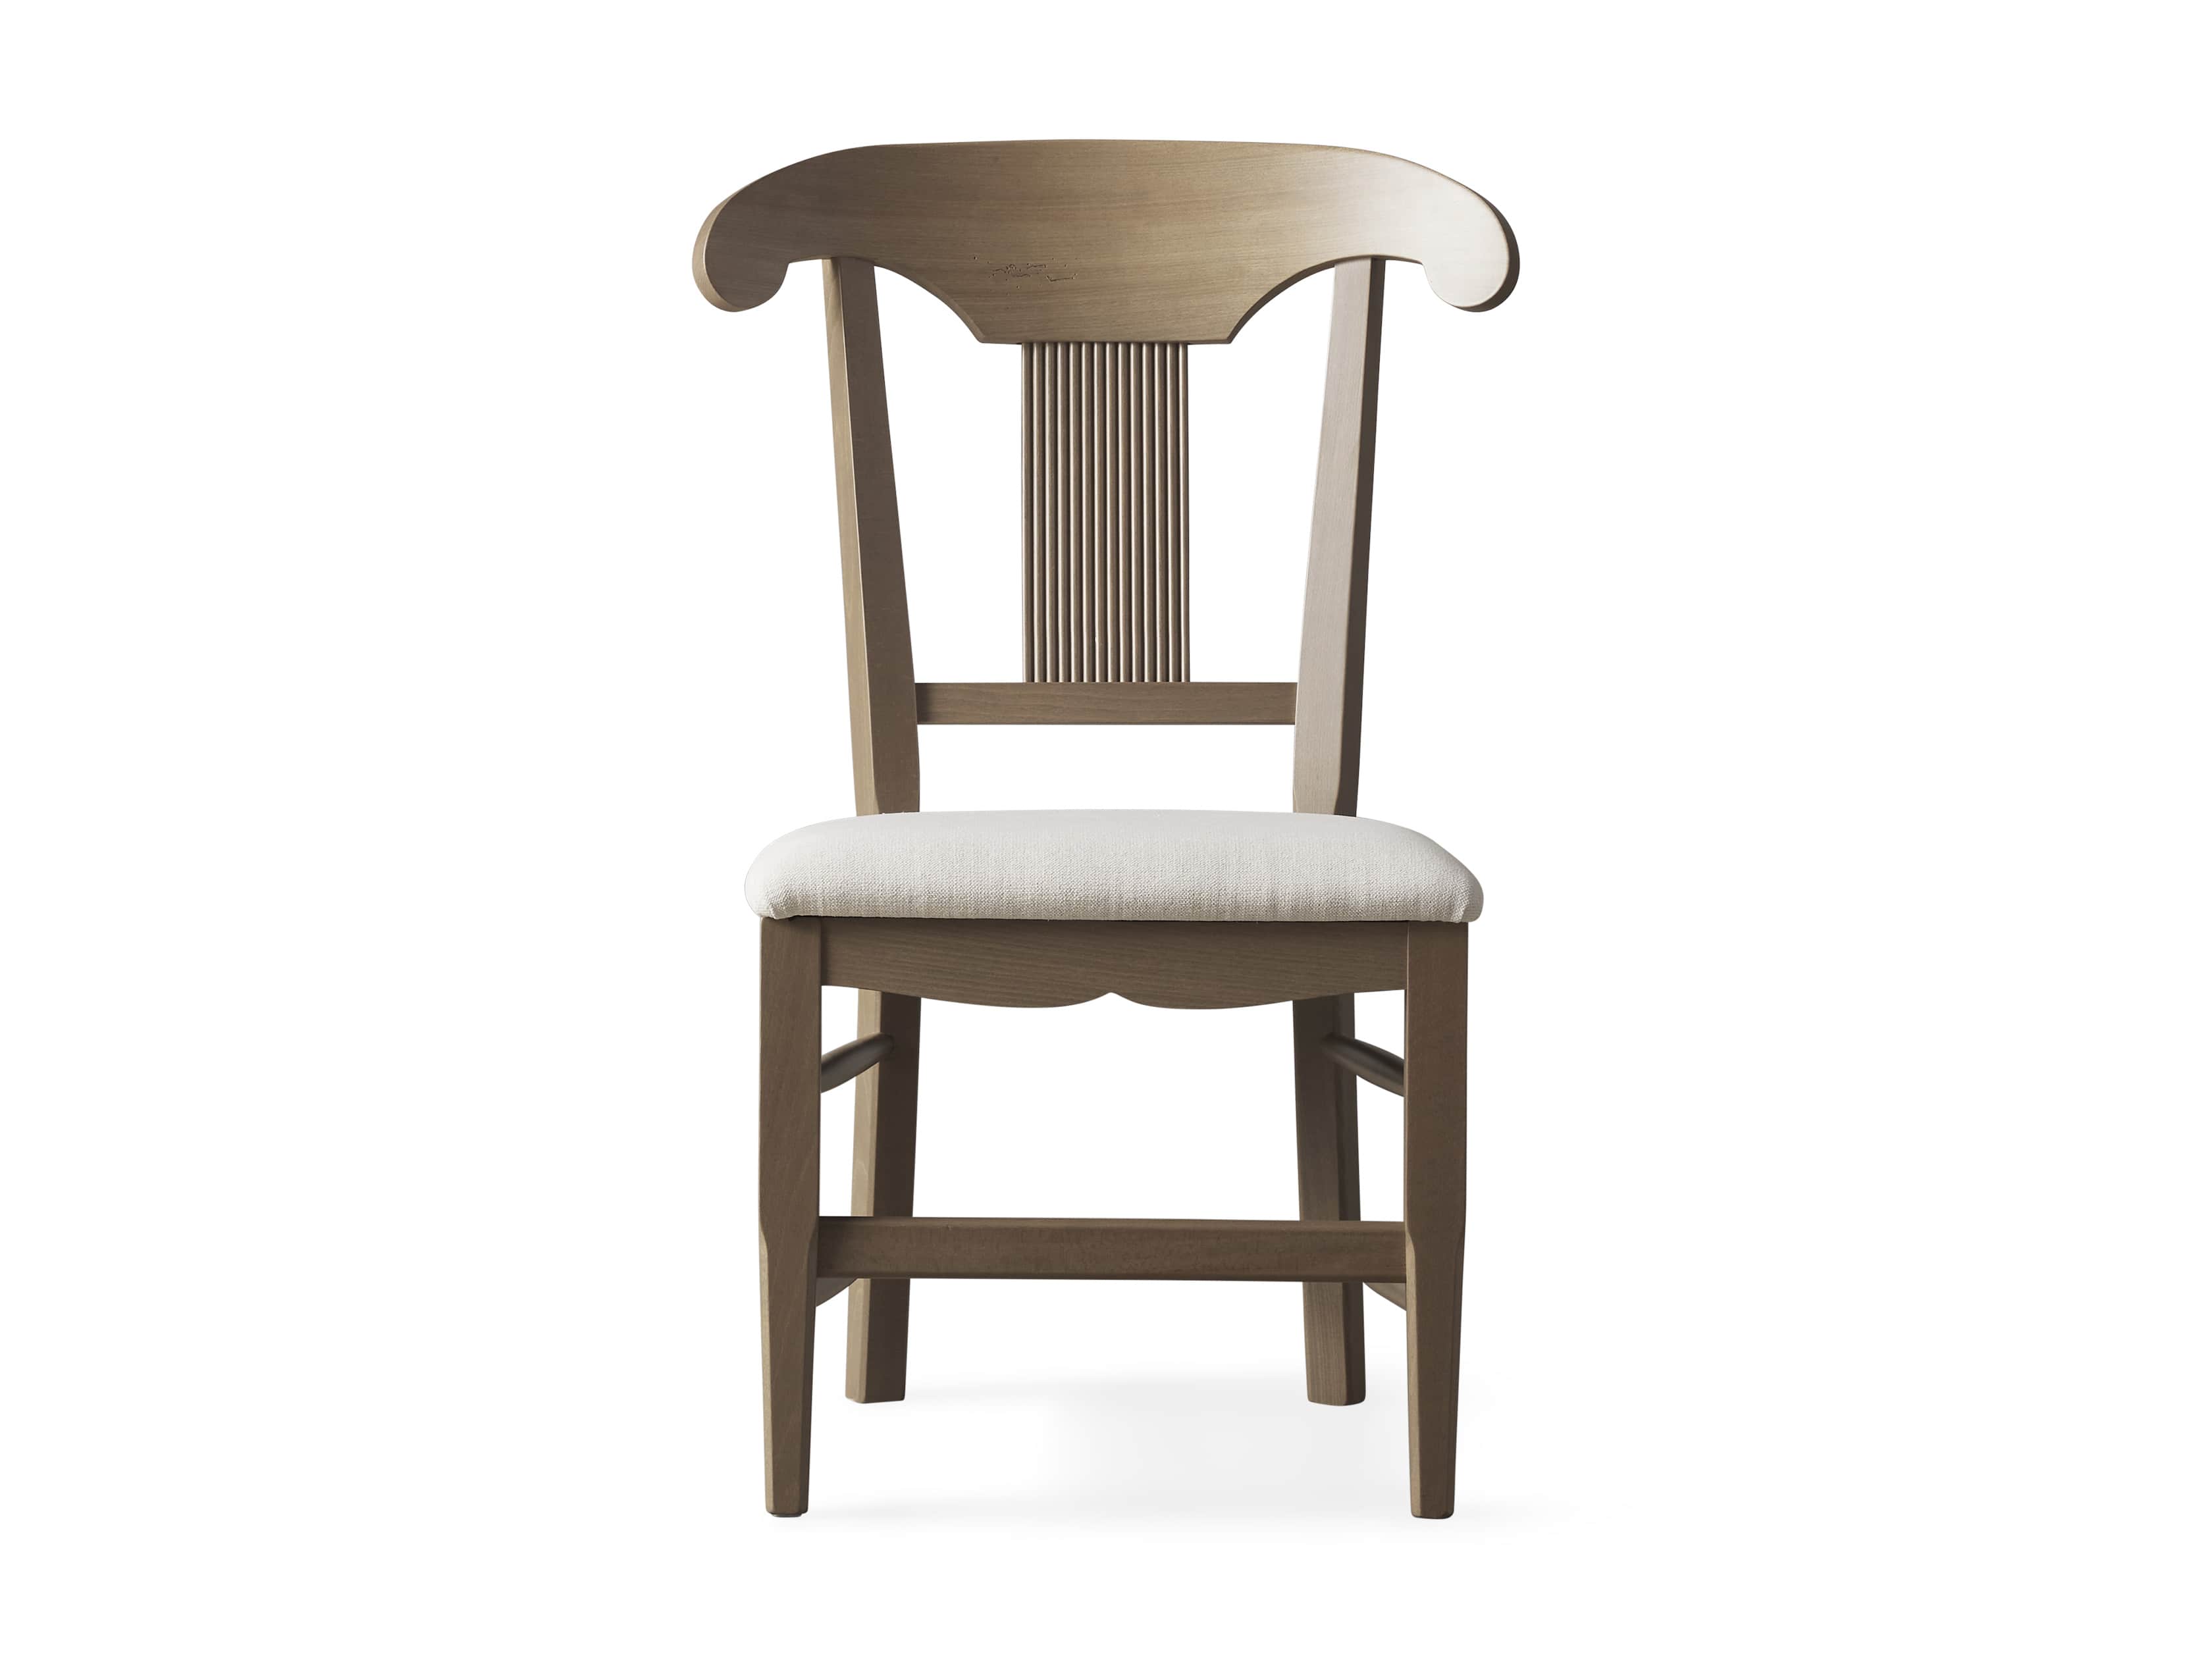 Tuscany Dining Side Chair In Antique, Tuscany Dining Chairs